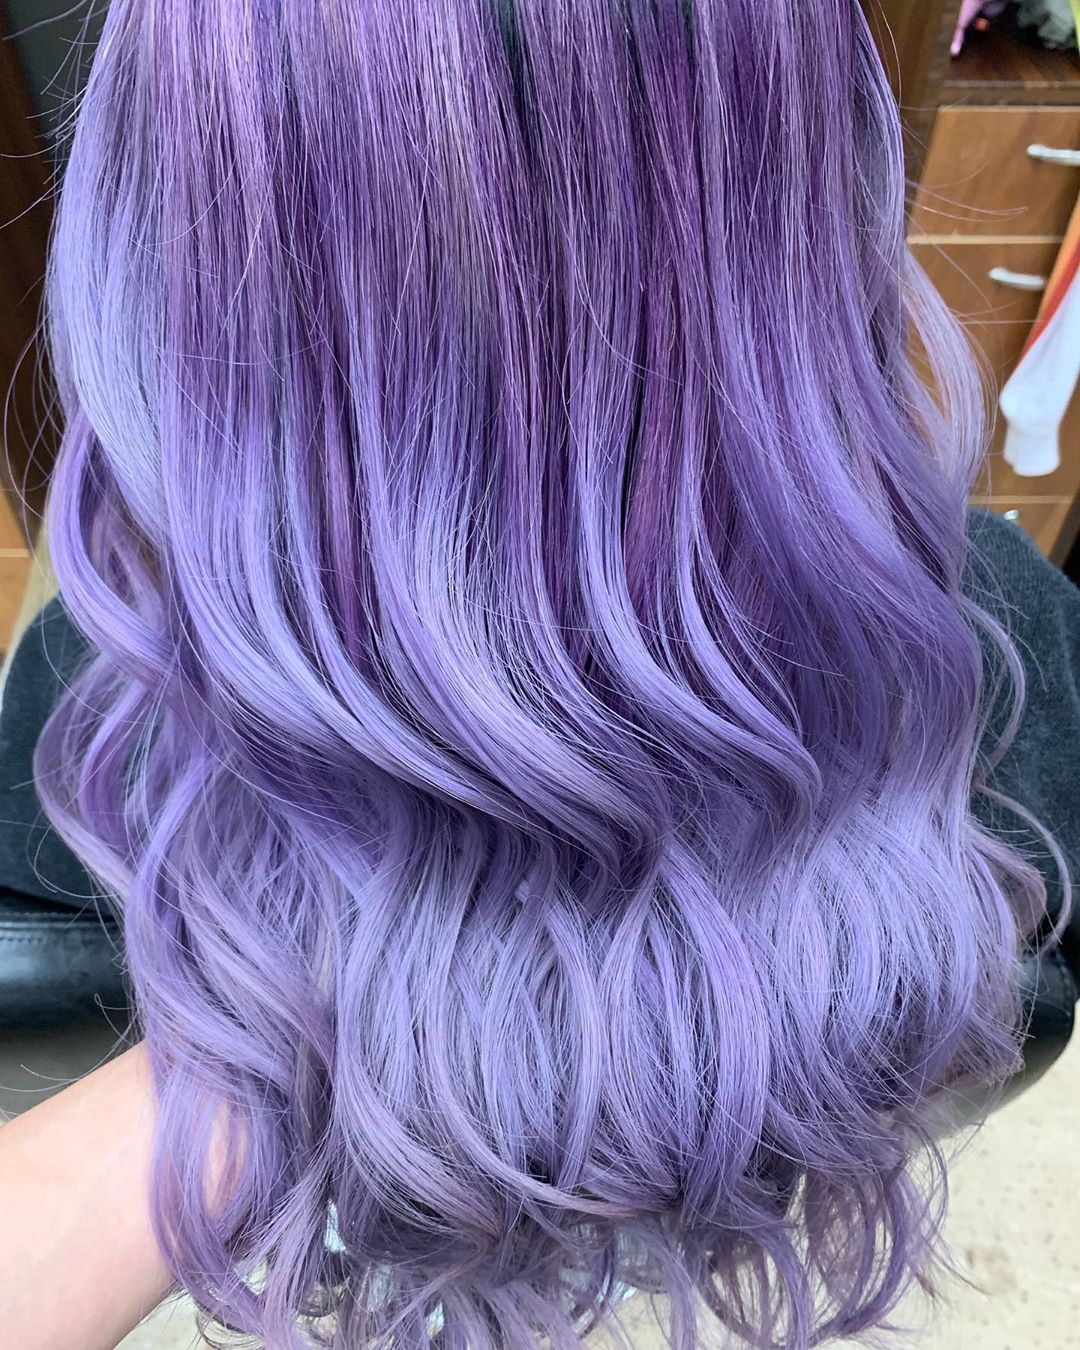 Stunning image of woman with lavender hair